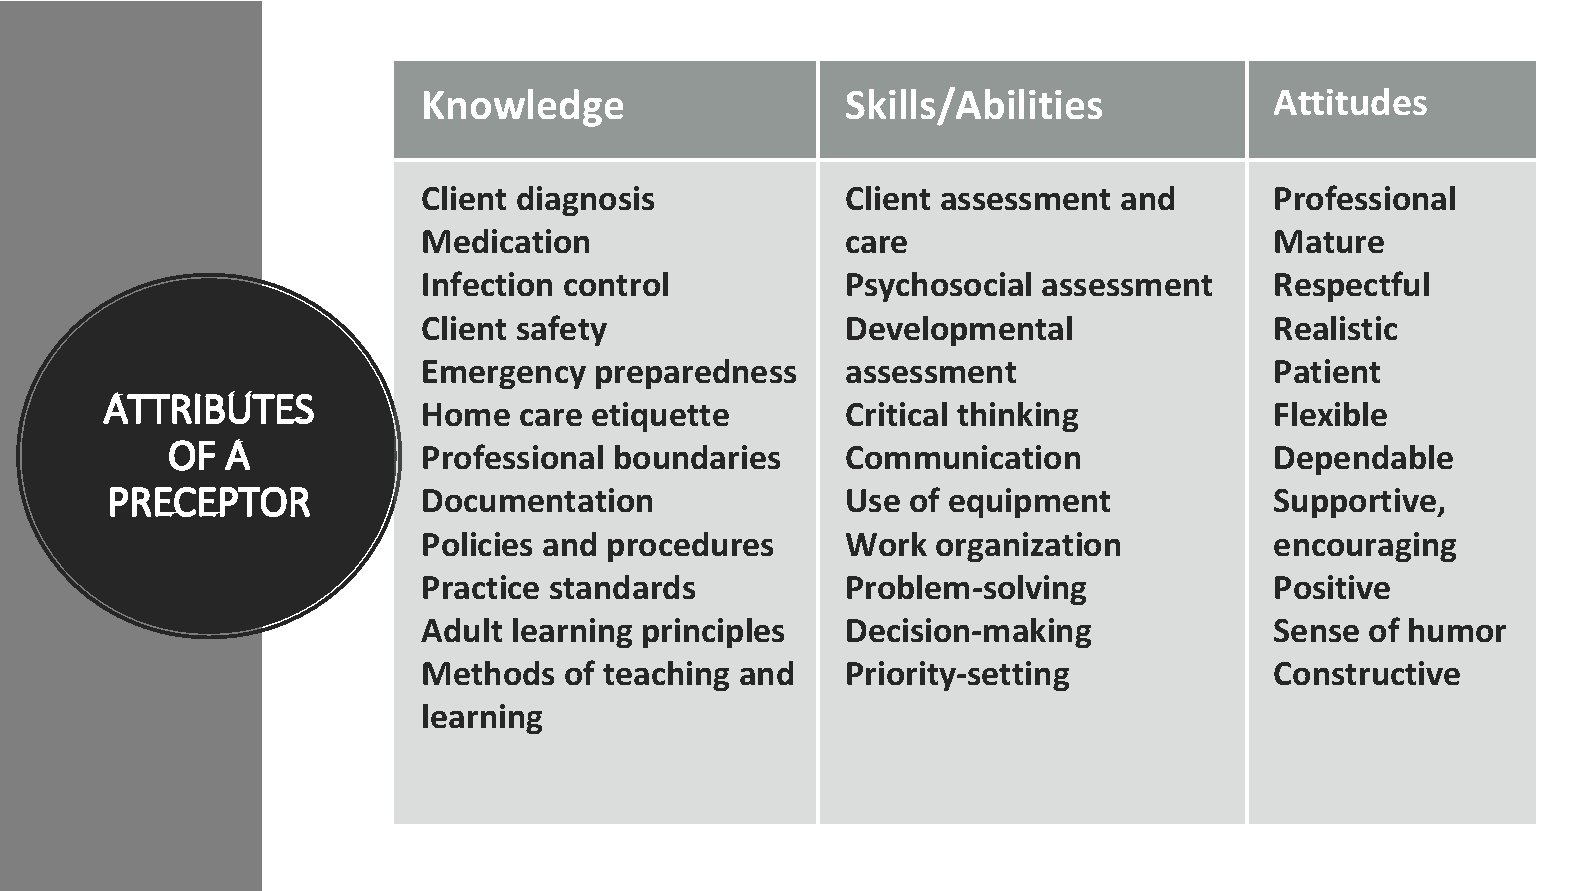 ATTRIBUTES OF A PRECEPTOR Knowledge Skills/Abilities Attitudes Client diagnosis Medication Infection control Client safety